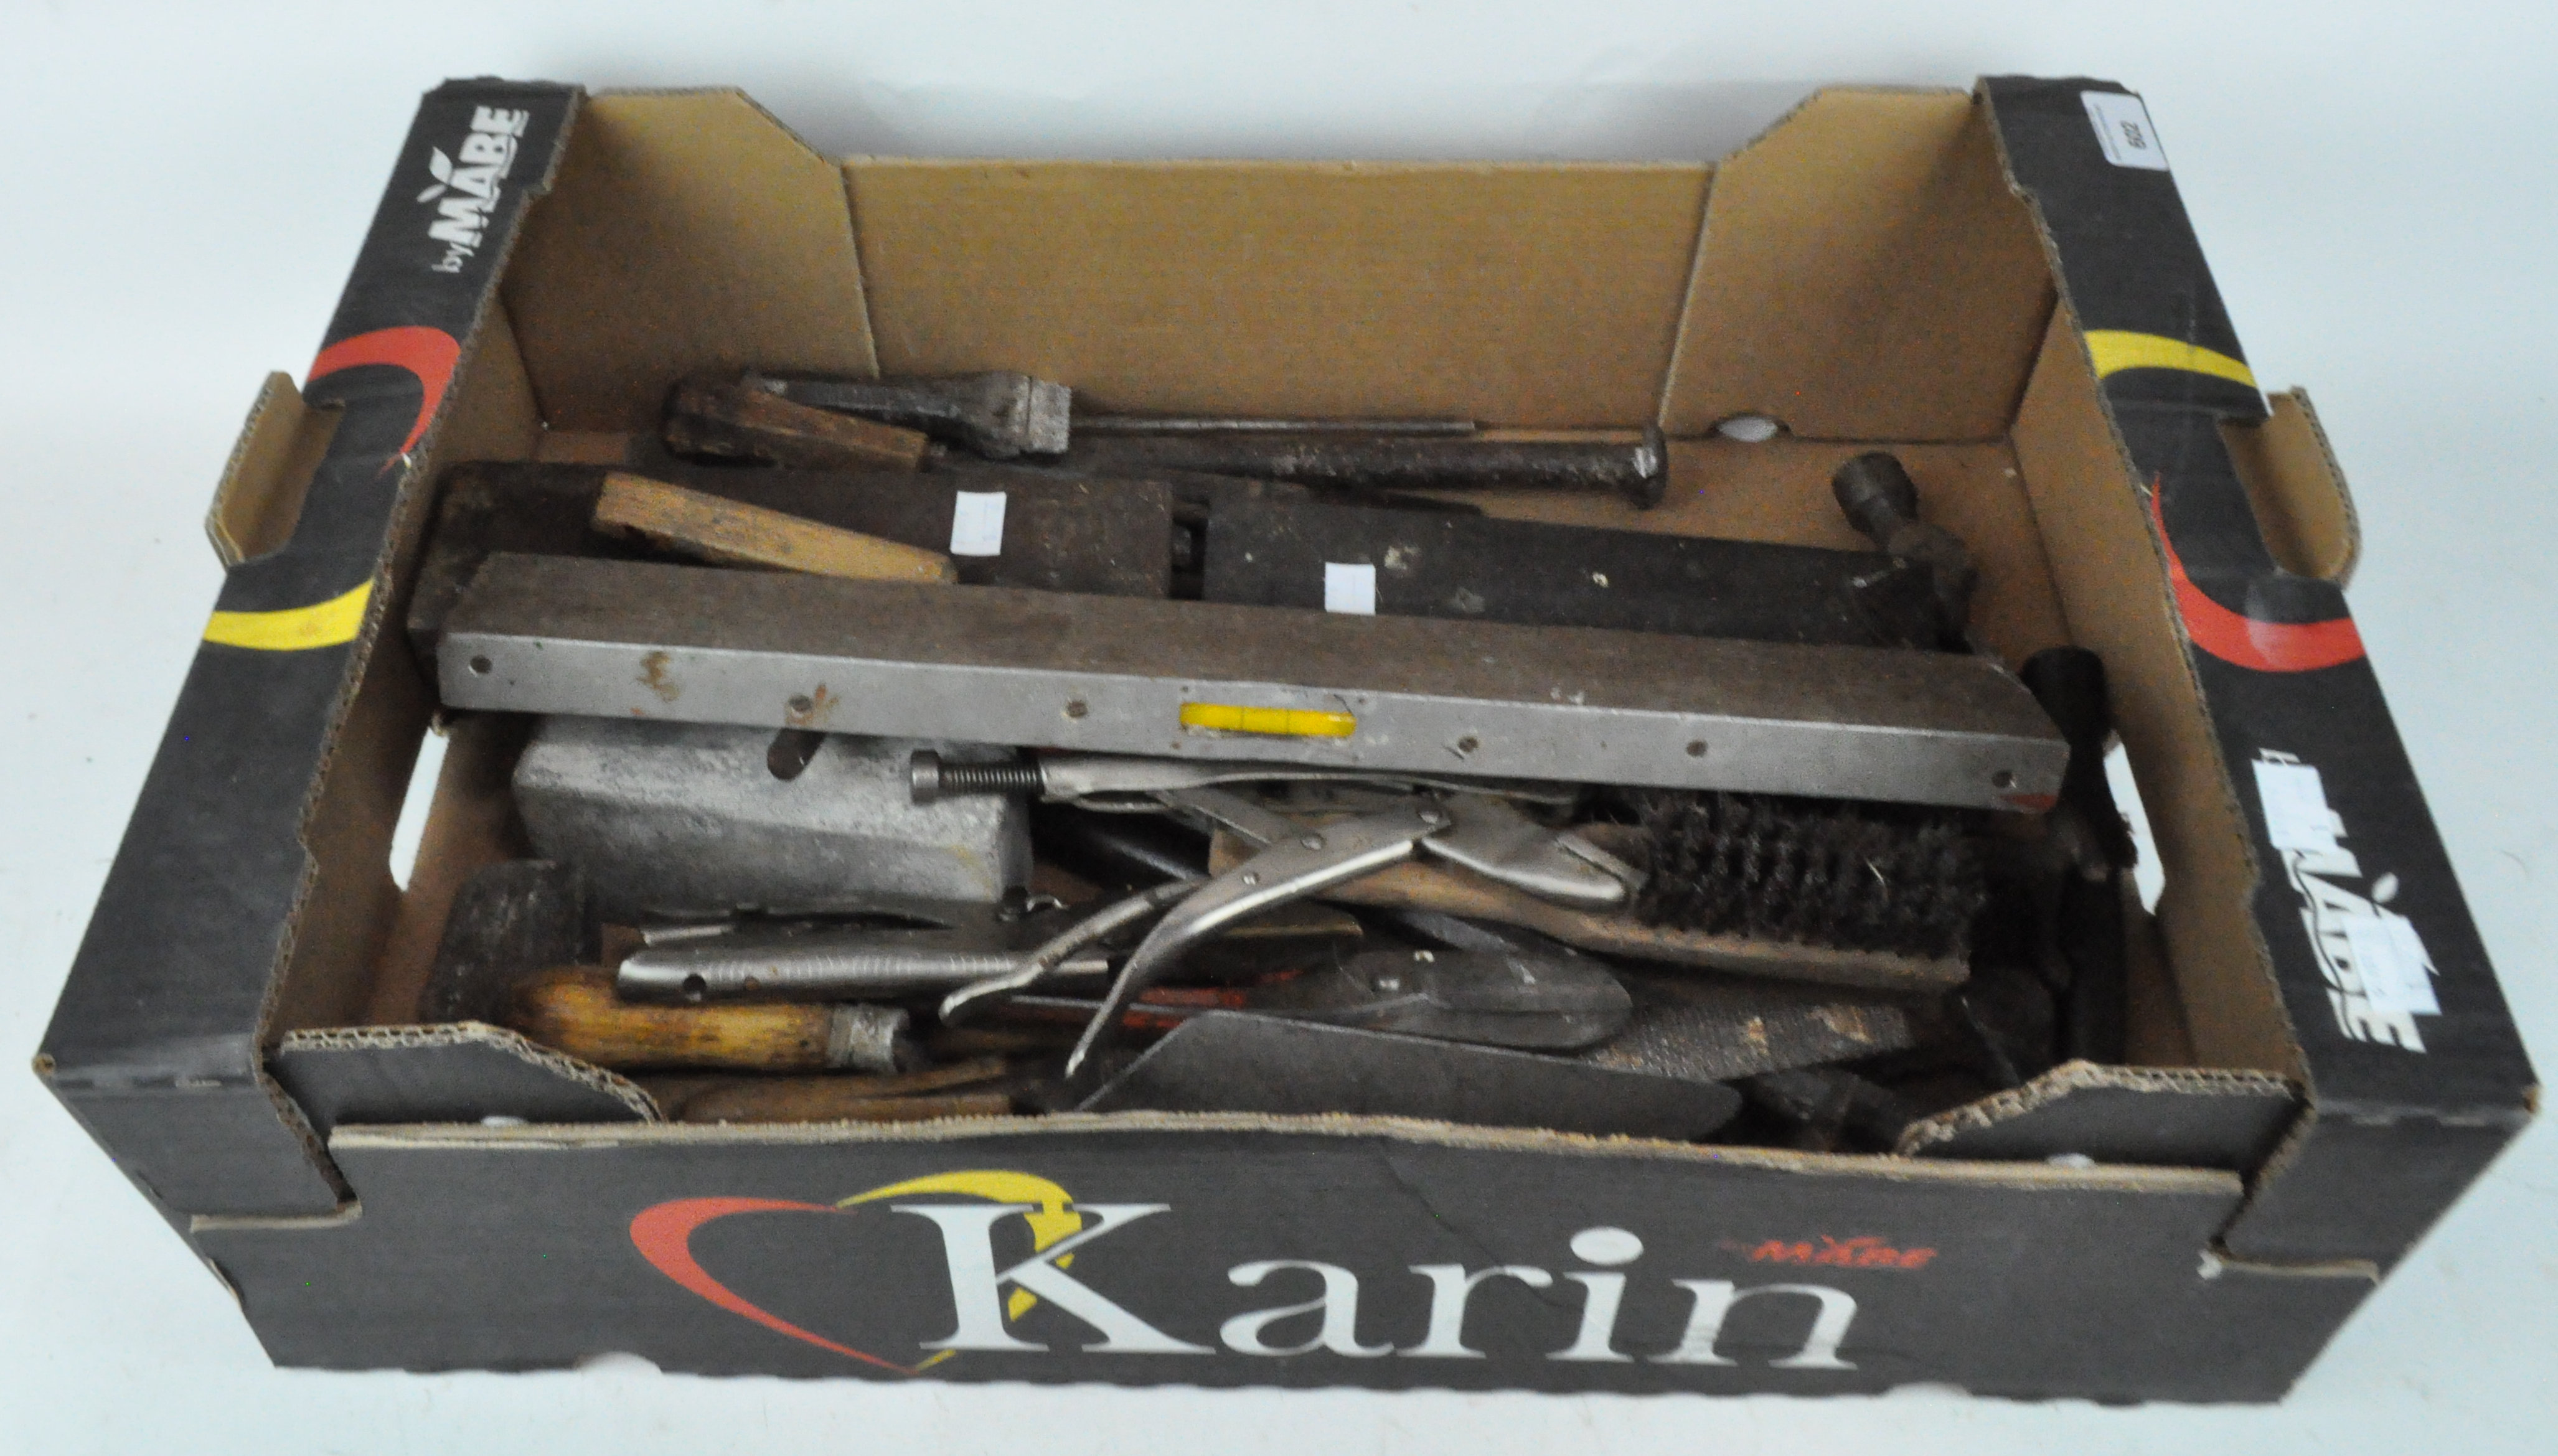 A large G-clamp and a box of tools